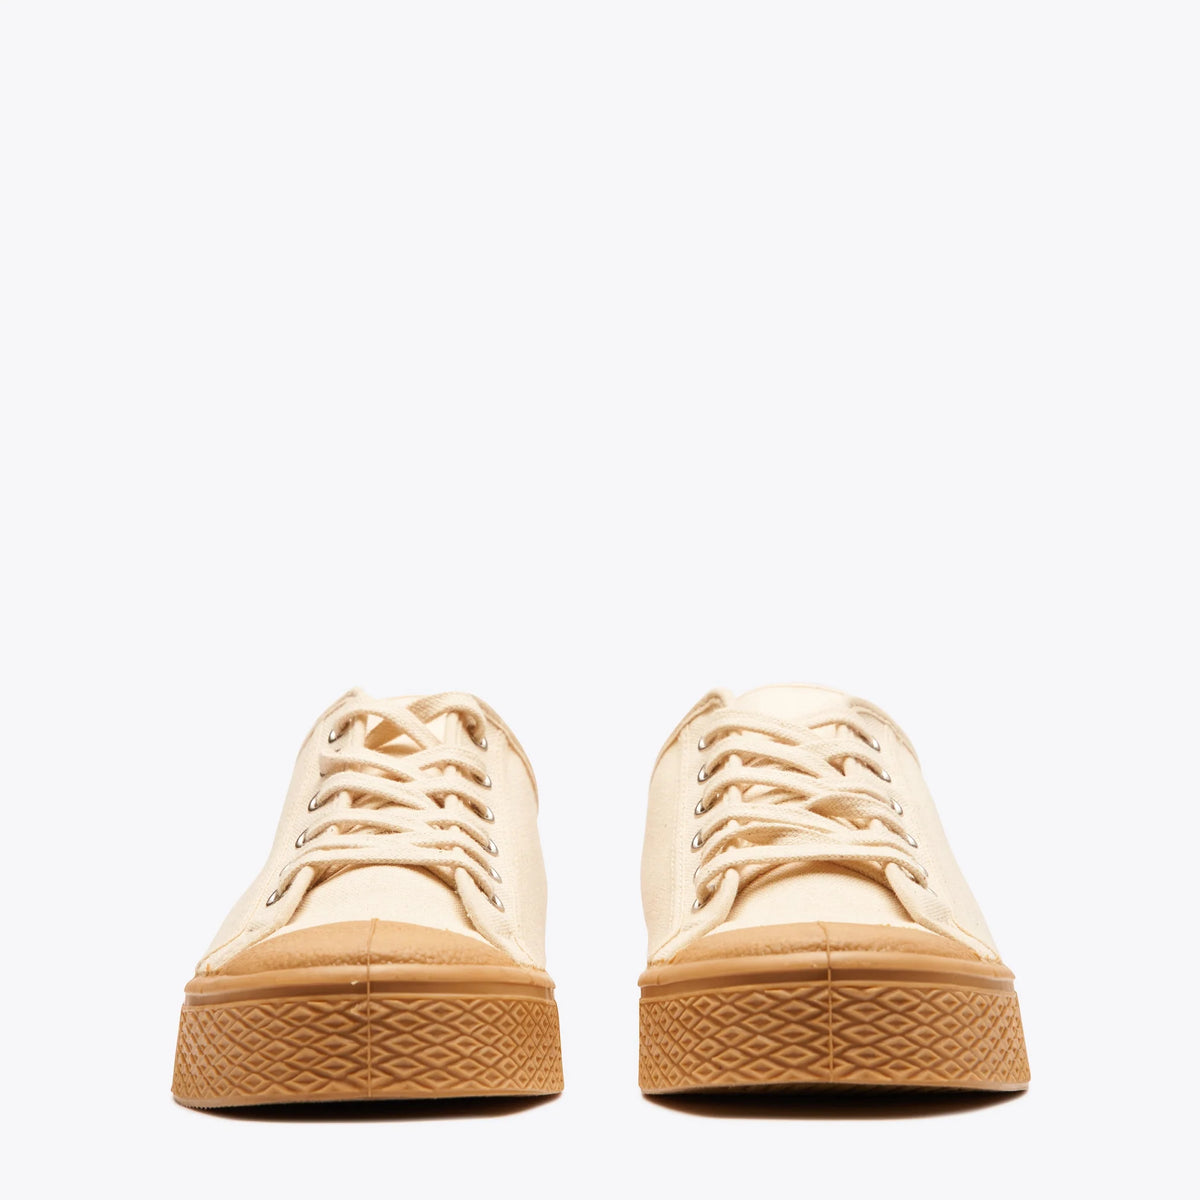 US Rubber Co Military Gum Low Top - Ivory